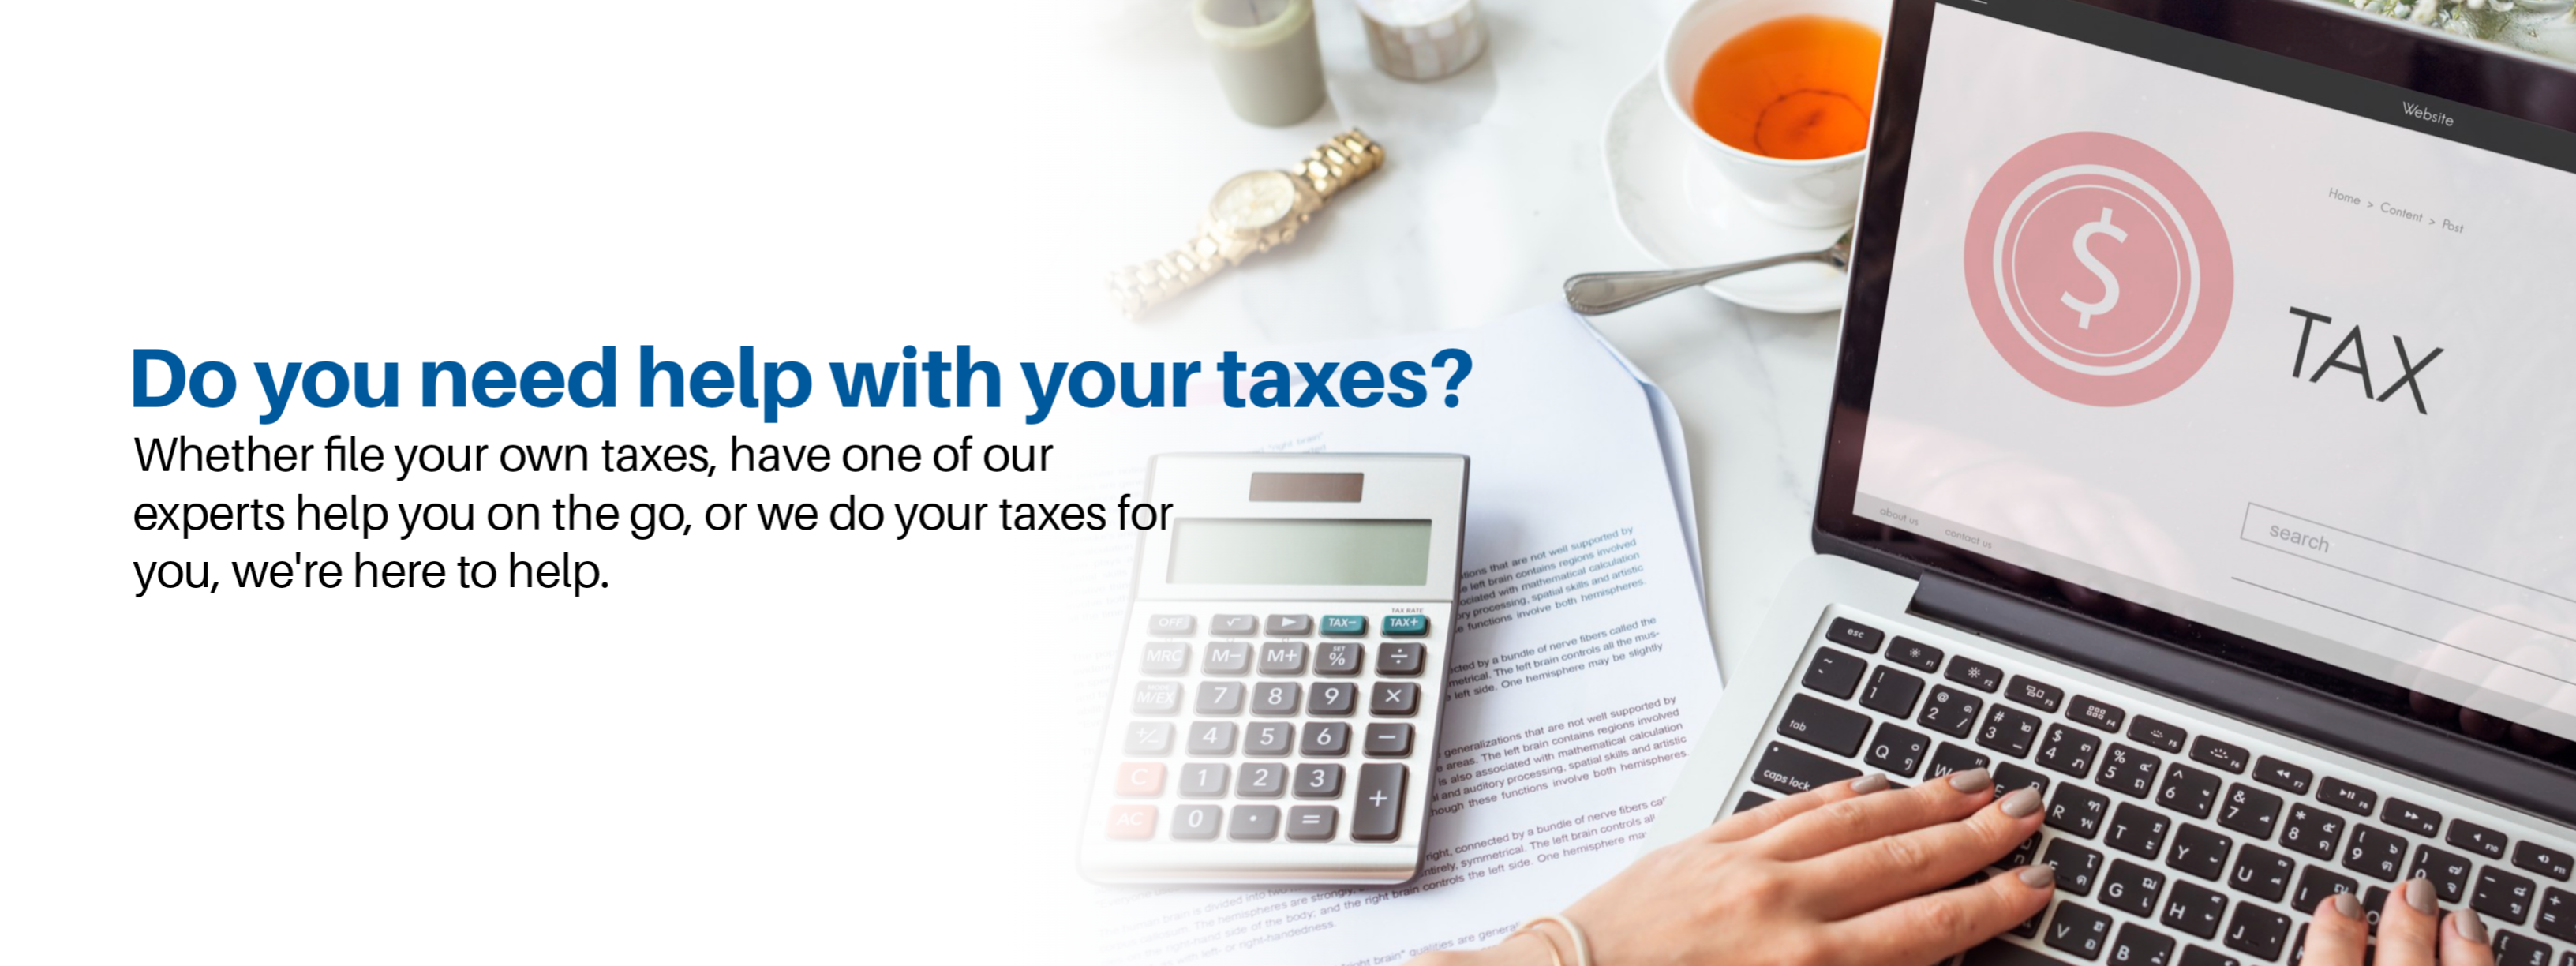 Do you need help with your taxes?